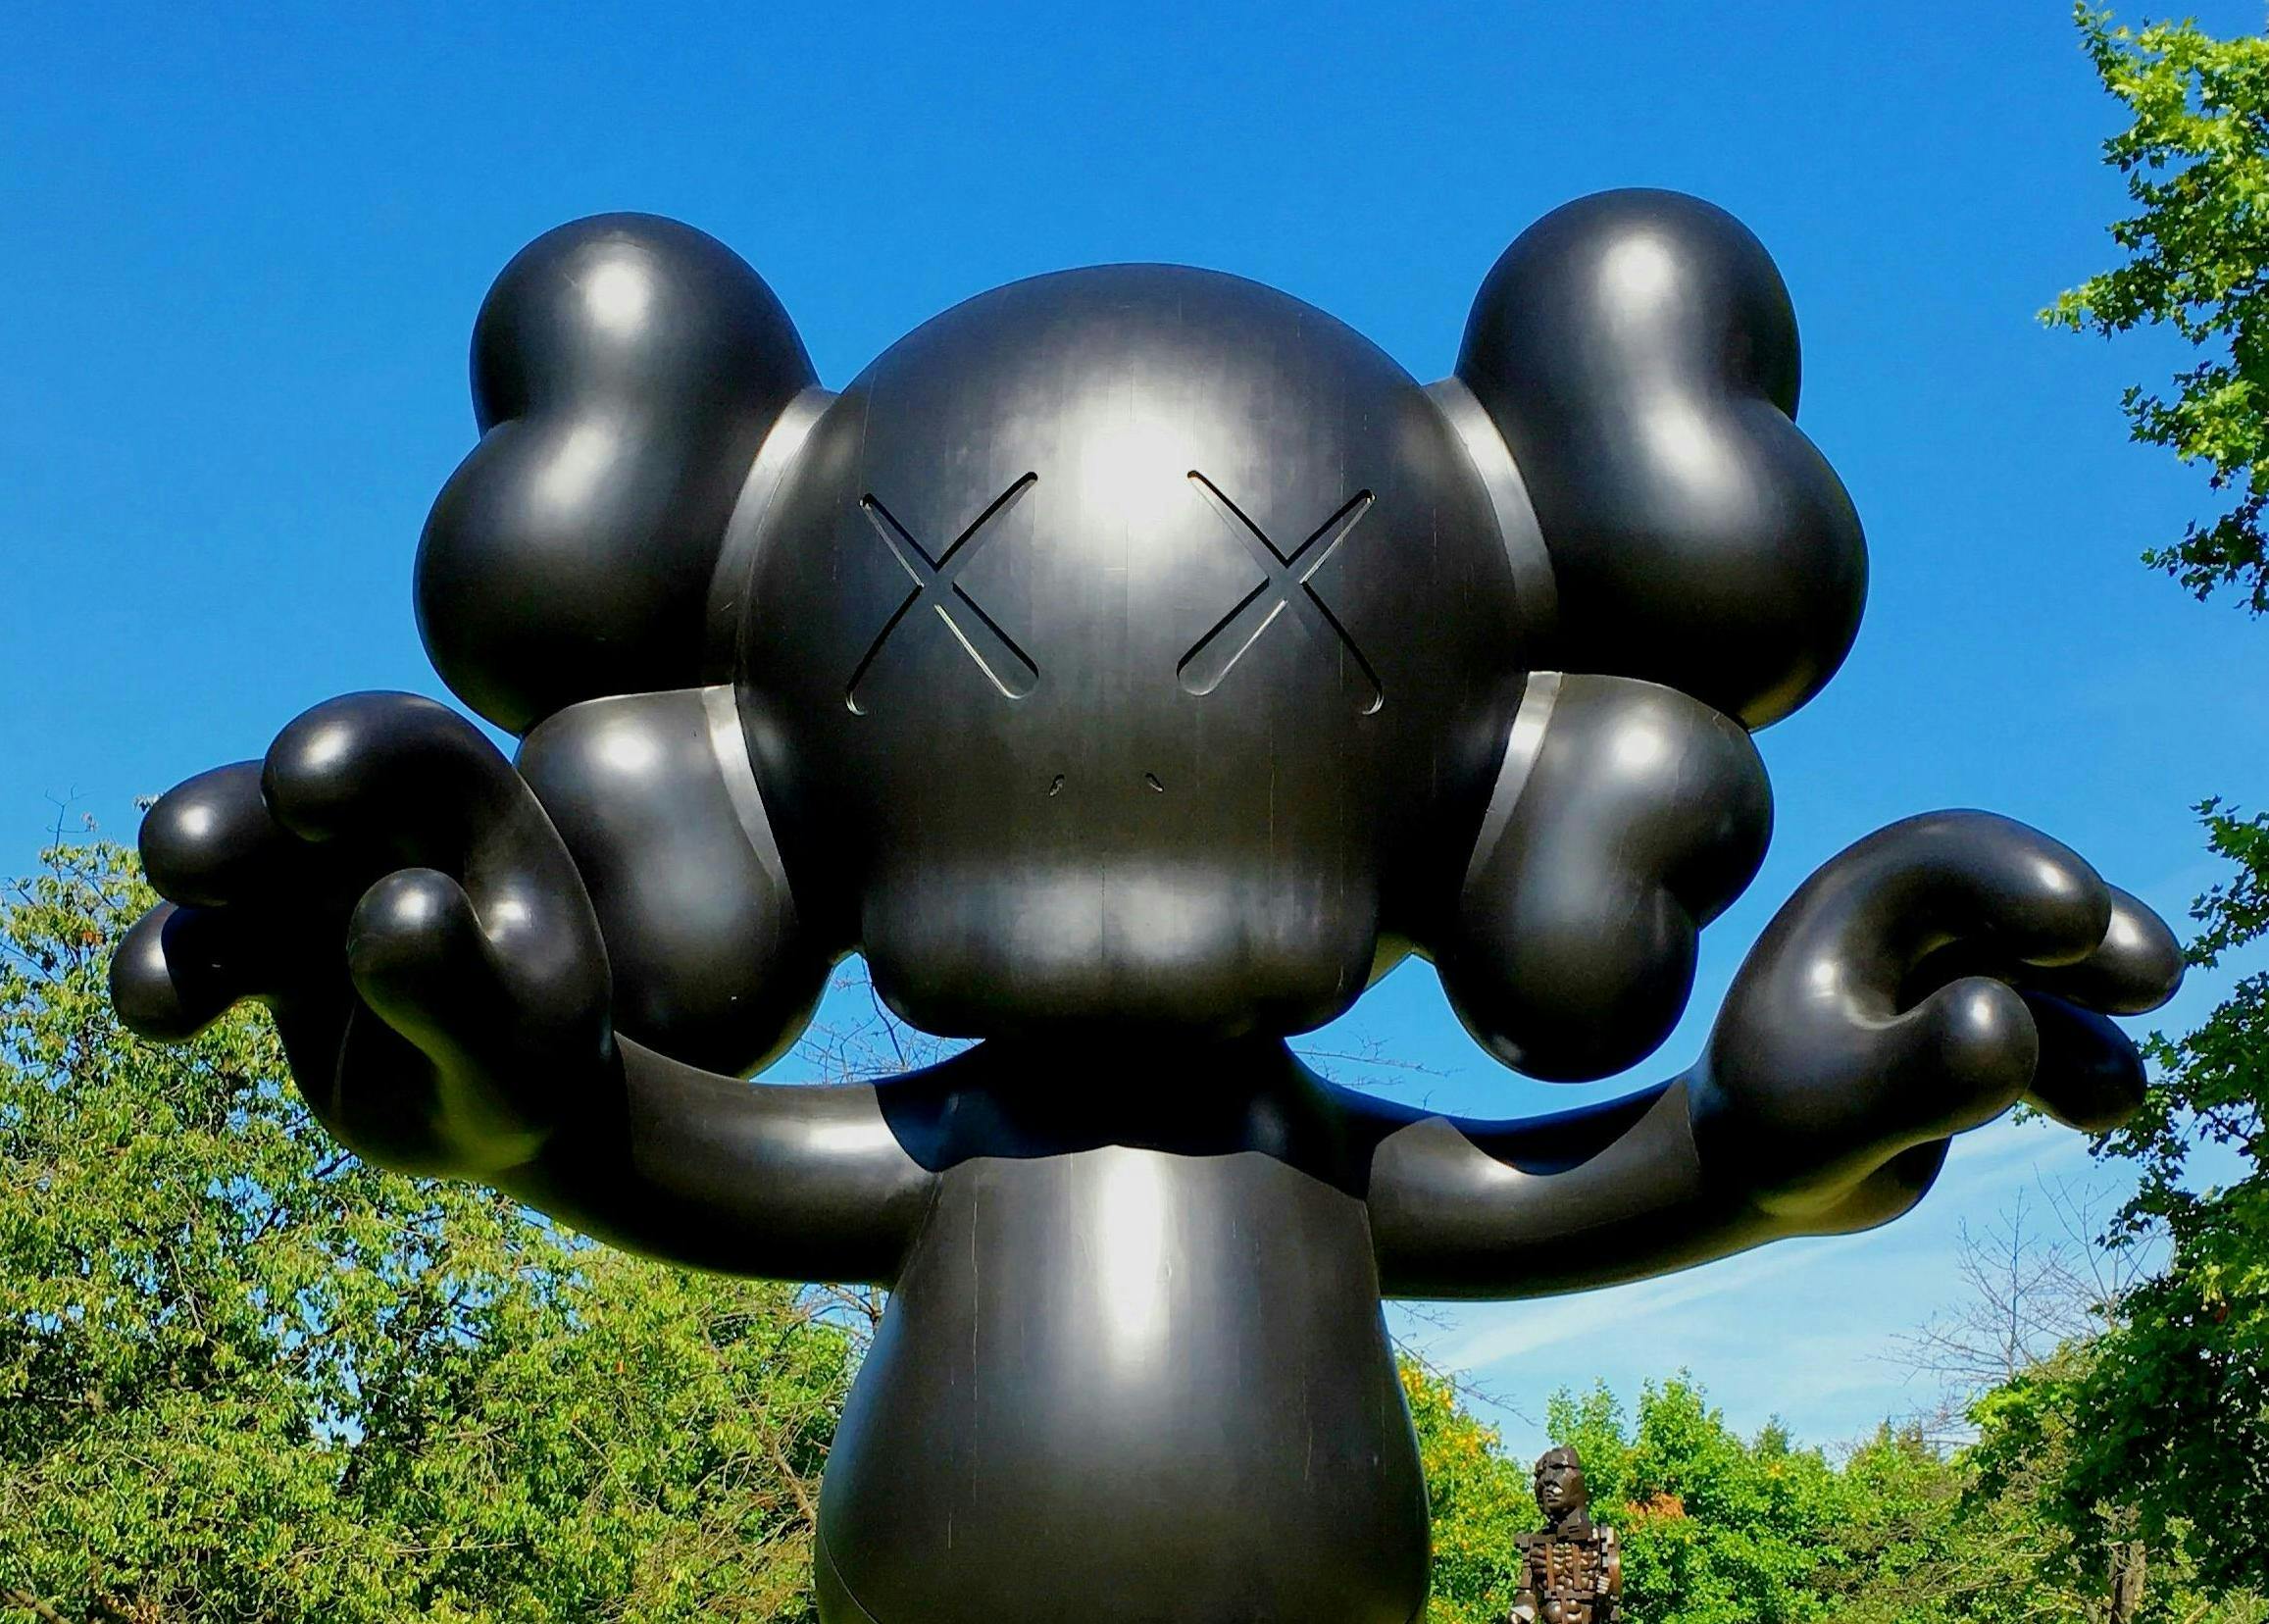 A statue and installation piece of the artist KAWS